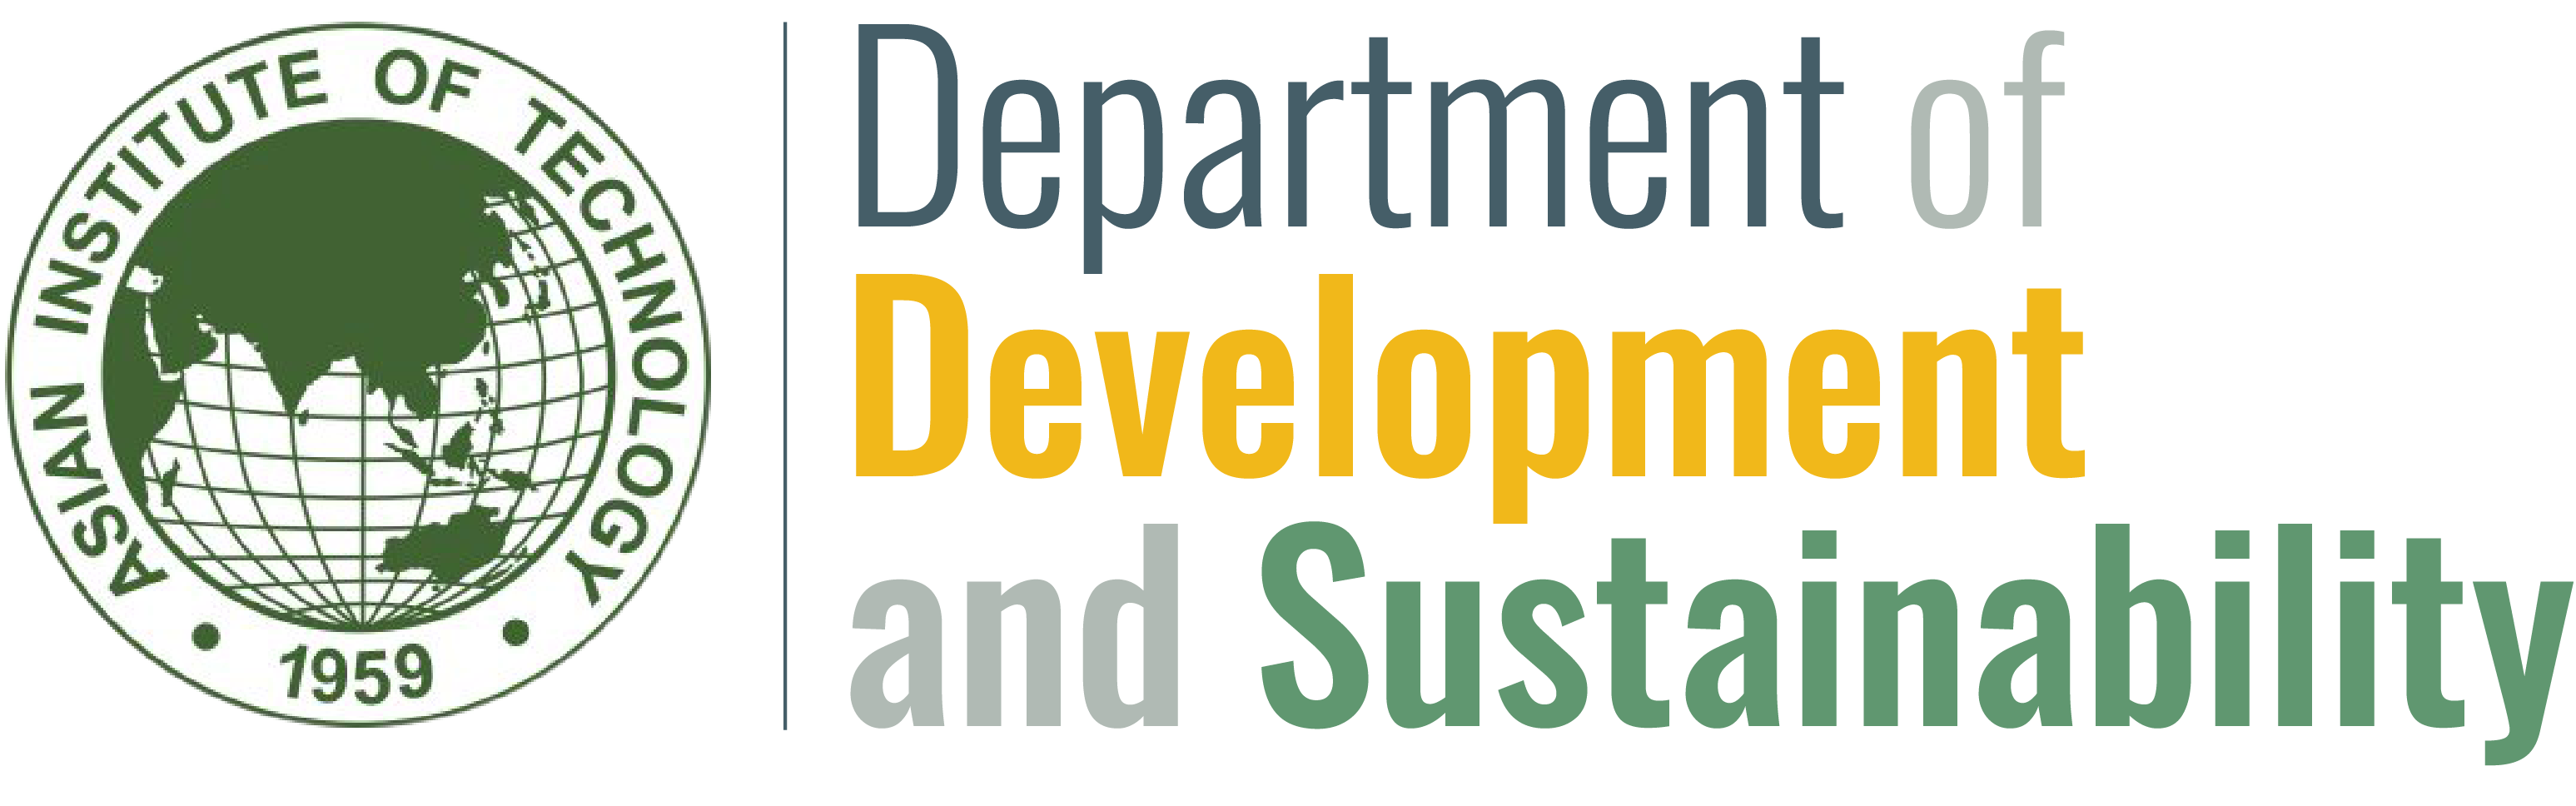 Department of Development and Sustainability